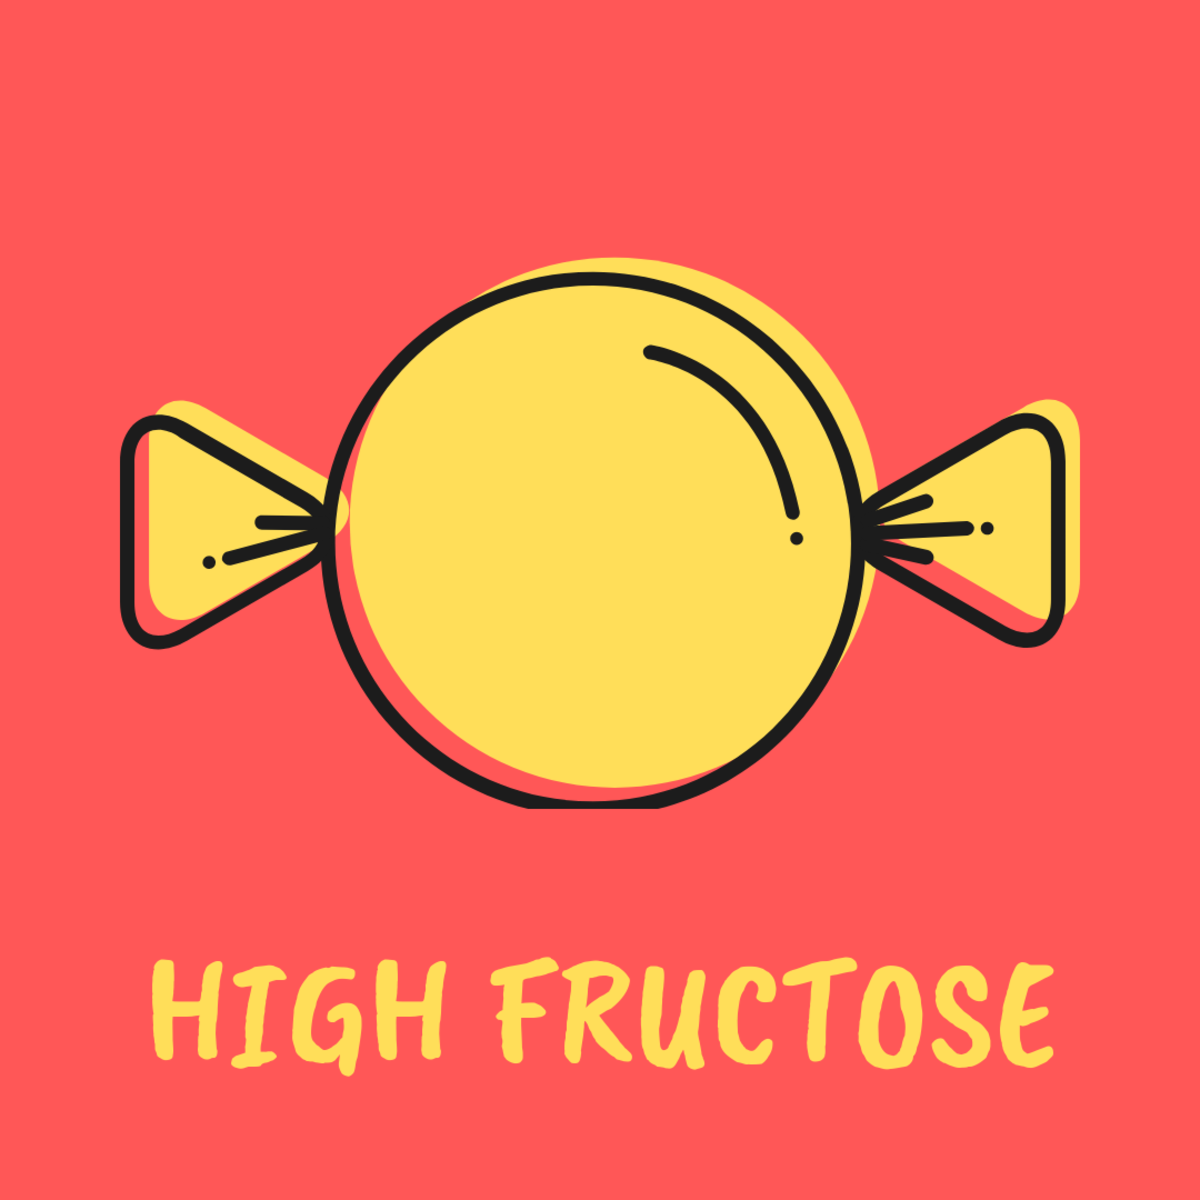 High Fructose will defeat you with sweetness!